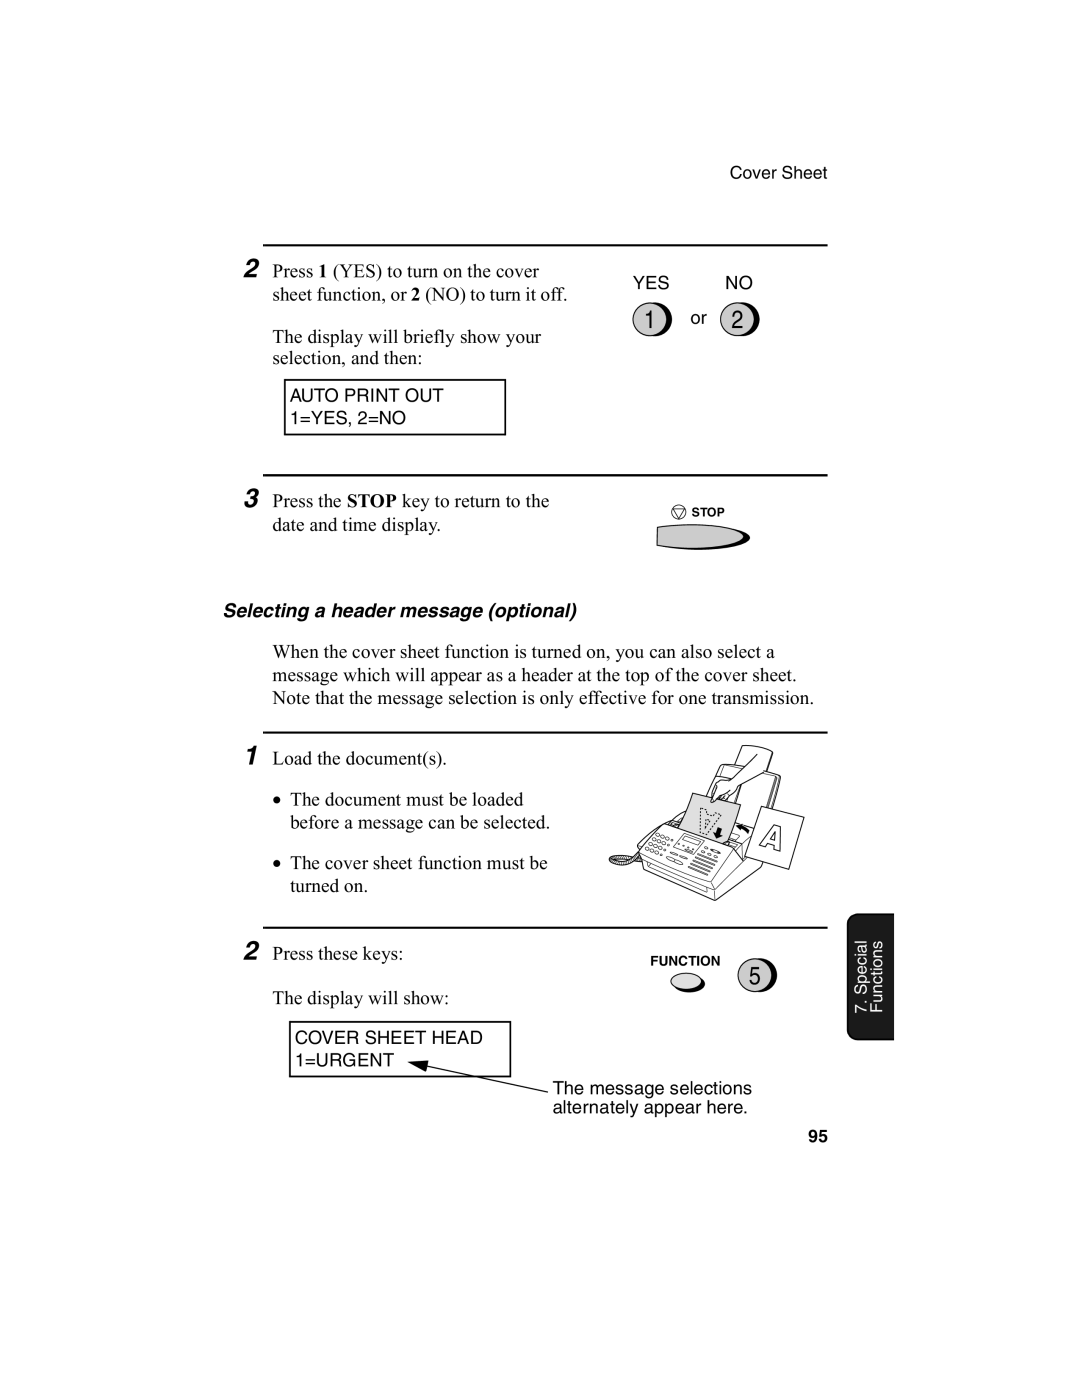 Sharp FO-2970M operation manual Selecting a header message optional 